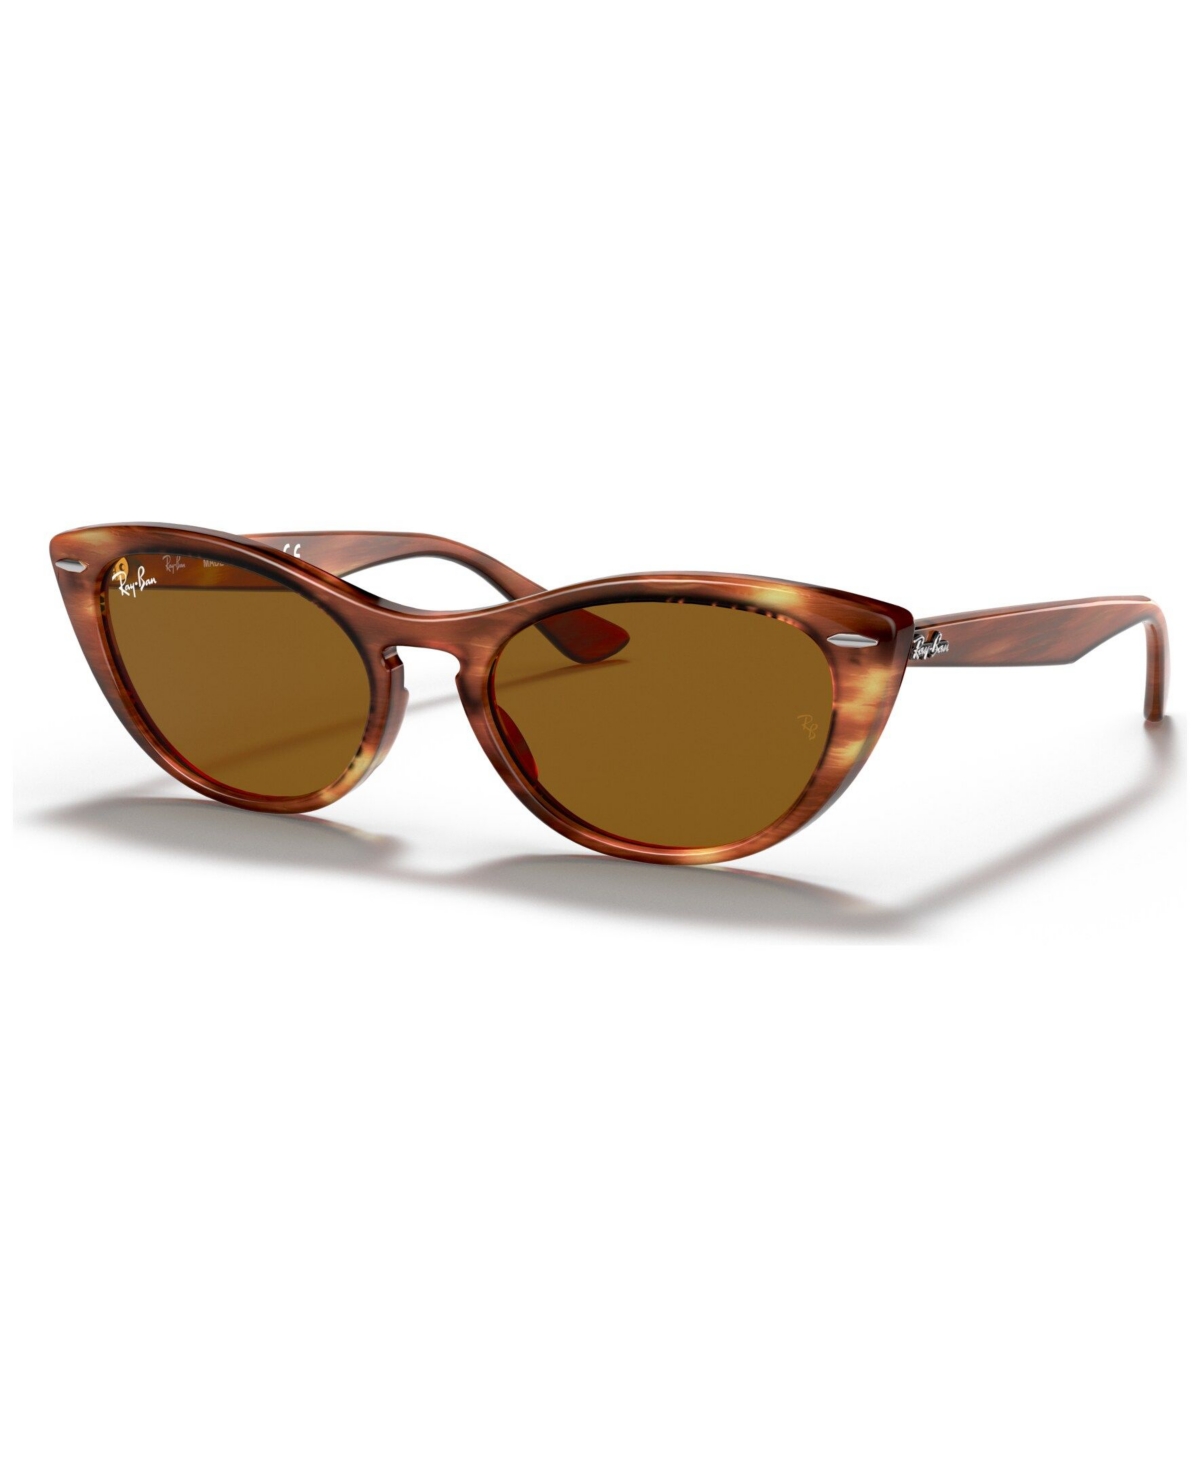 Ray Ban Nina Sunglasses In Stripped Brown,brown